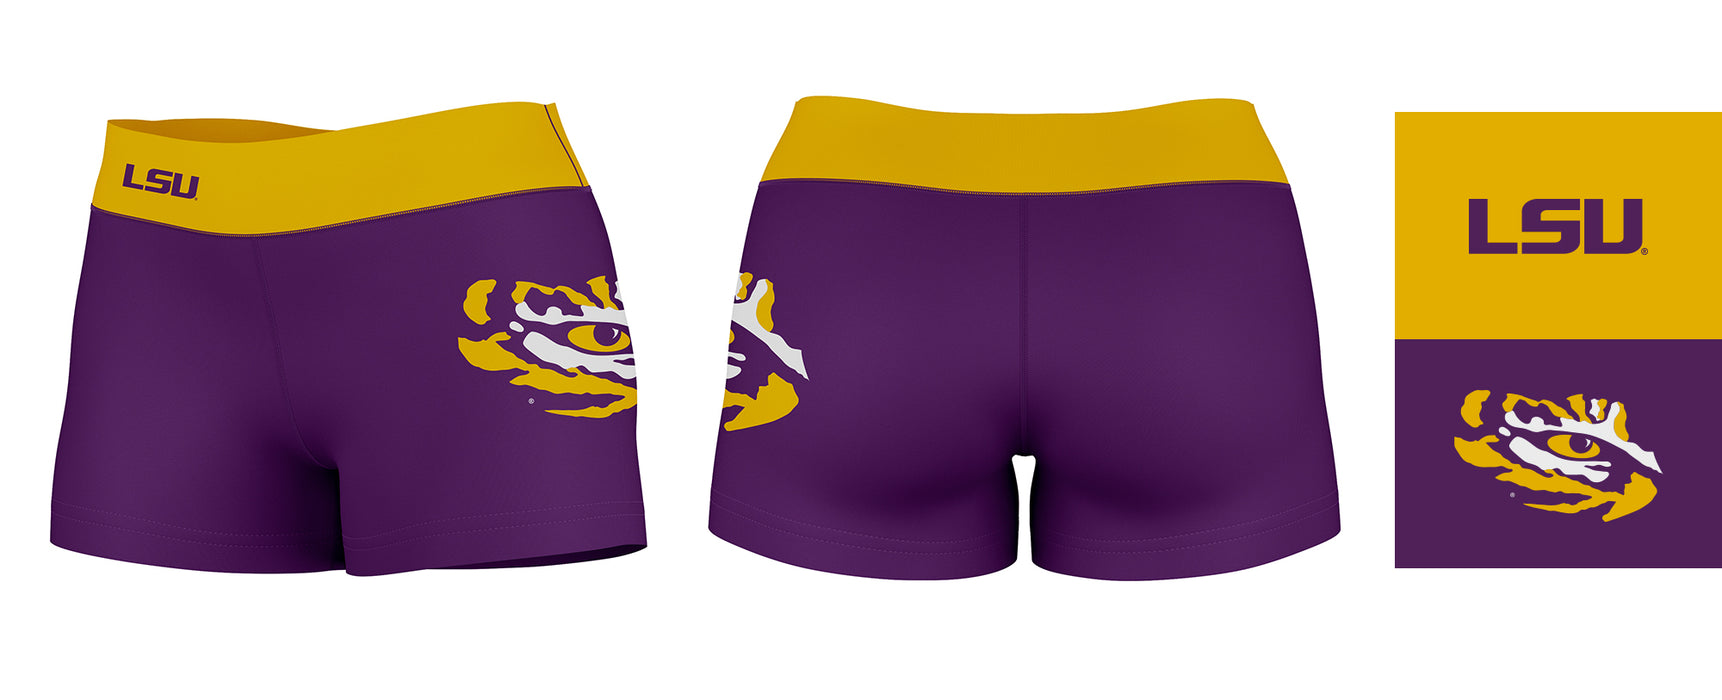 LSU Tigers Vive La Fete Game Day Logo on Thigh and Waistband Purple & Gold Women Yoga Booty Workout Shorts 3.75 Inseam - Vive La Fête - Online Apparel Store